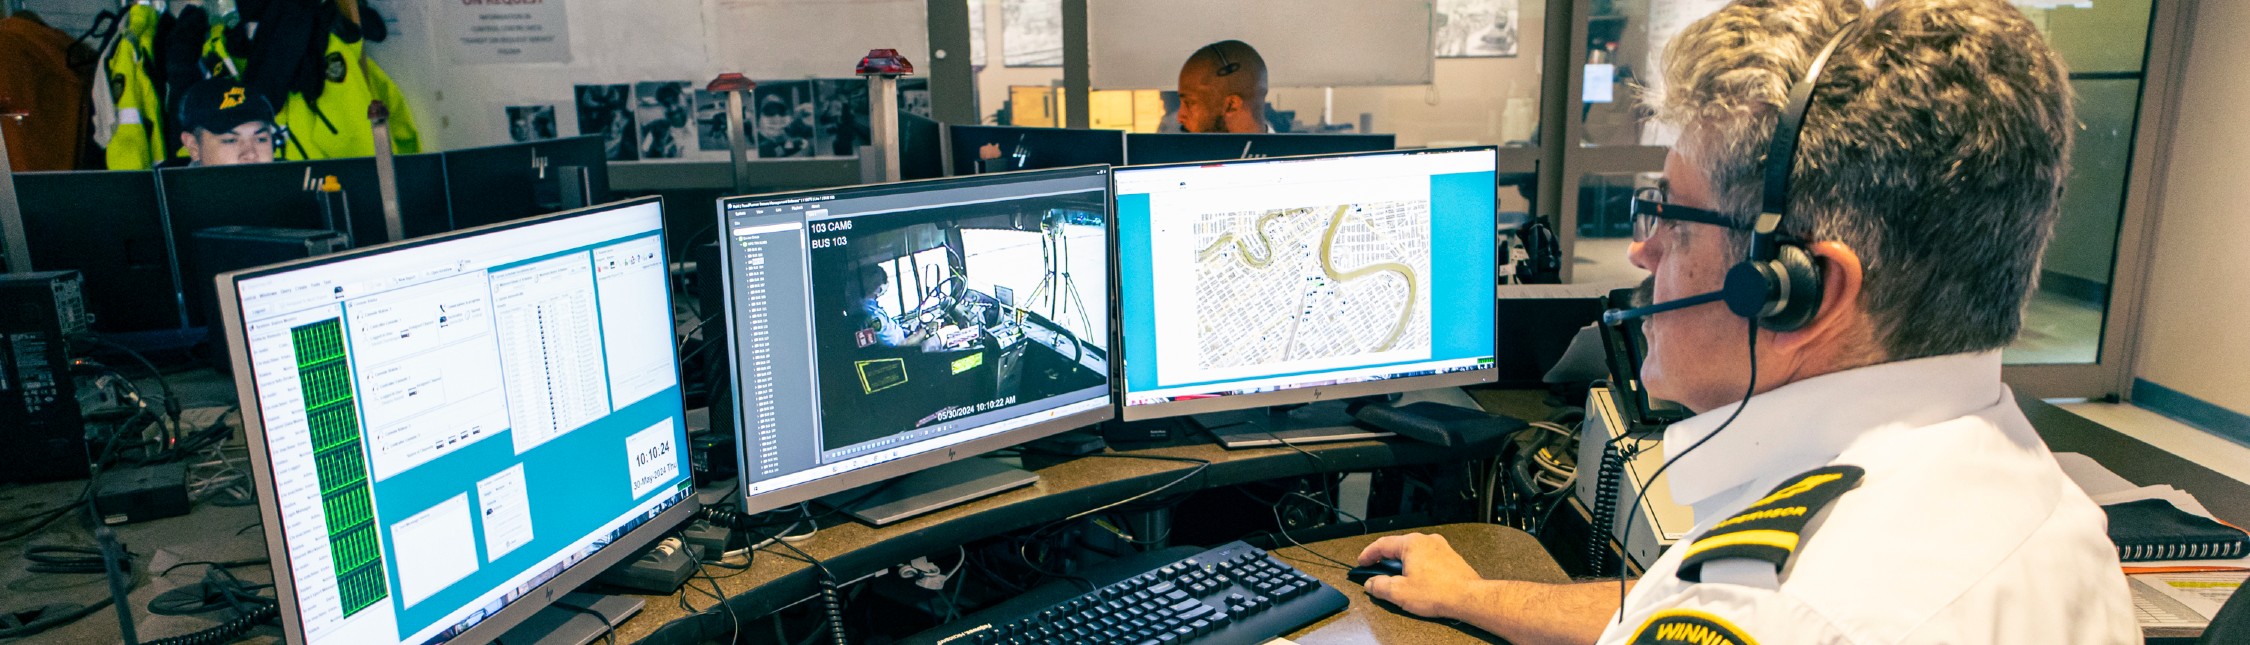 A Winnipeg Transit supervisor in Transit’s control centre where all video feeds are transmitted. Transit’s control centre is staffed by supervisors 24 hours a day, 7 days a week.